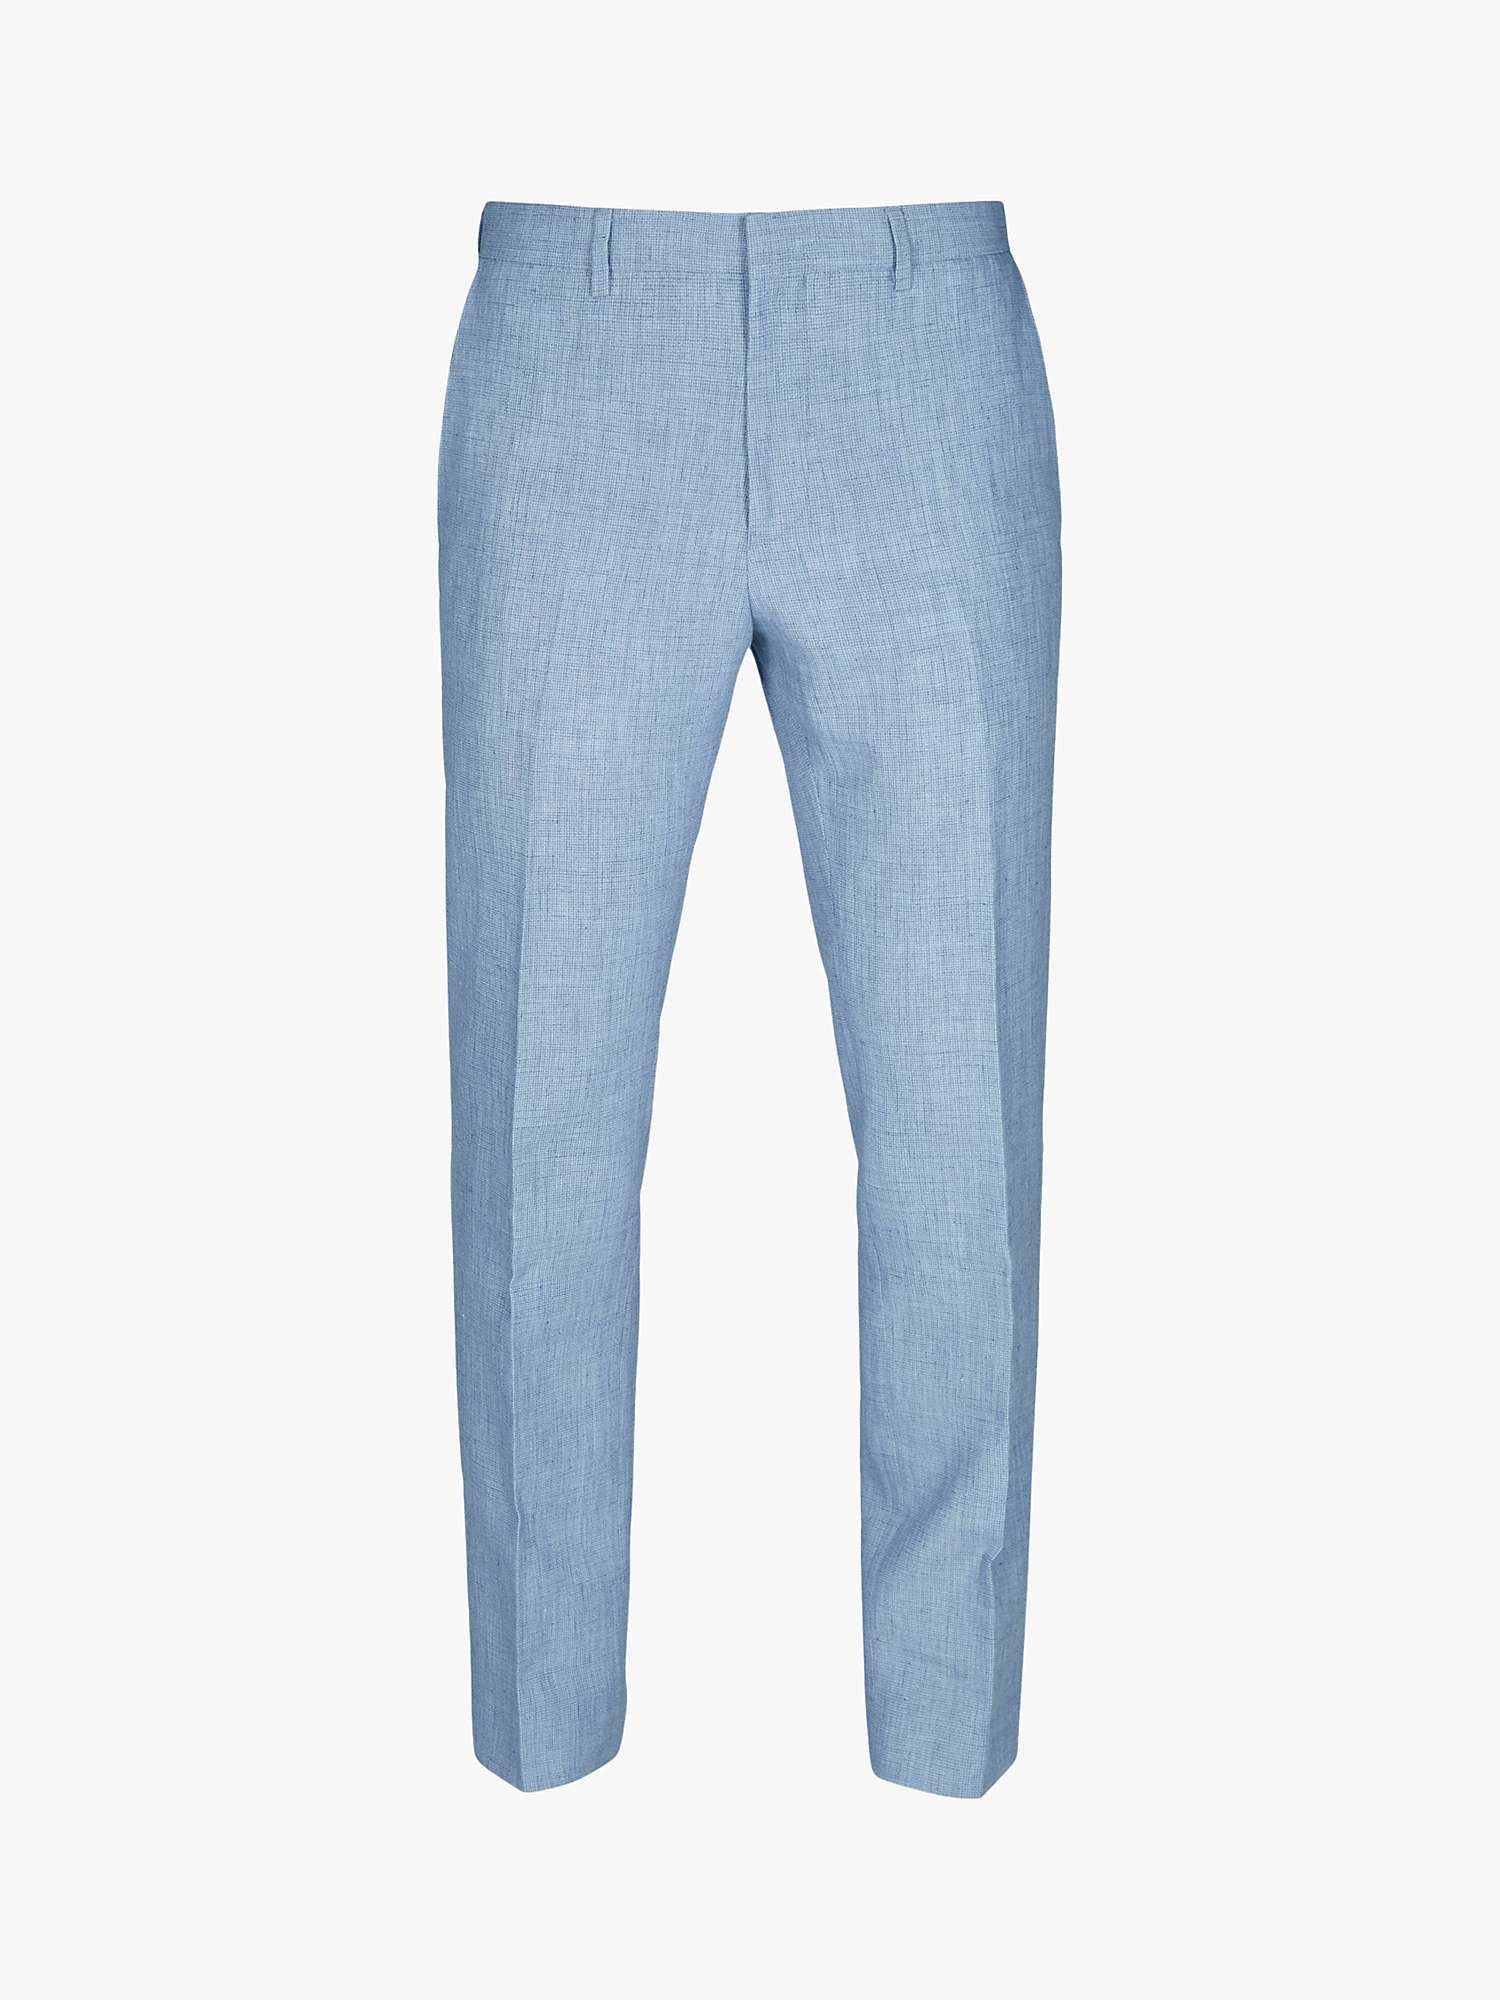 Buy Ted Baker Hydra Linen Slim Fit Trousers, Blue Online at johnlewis.com